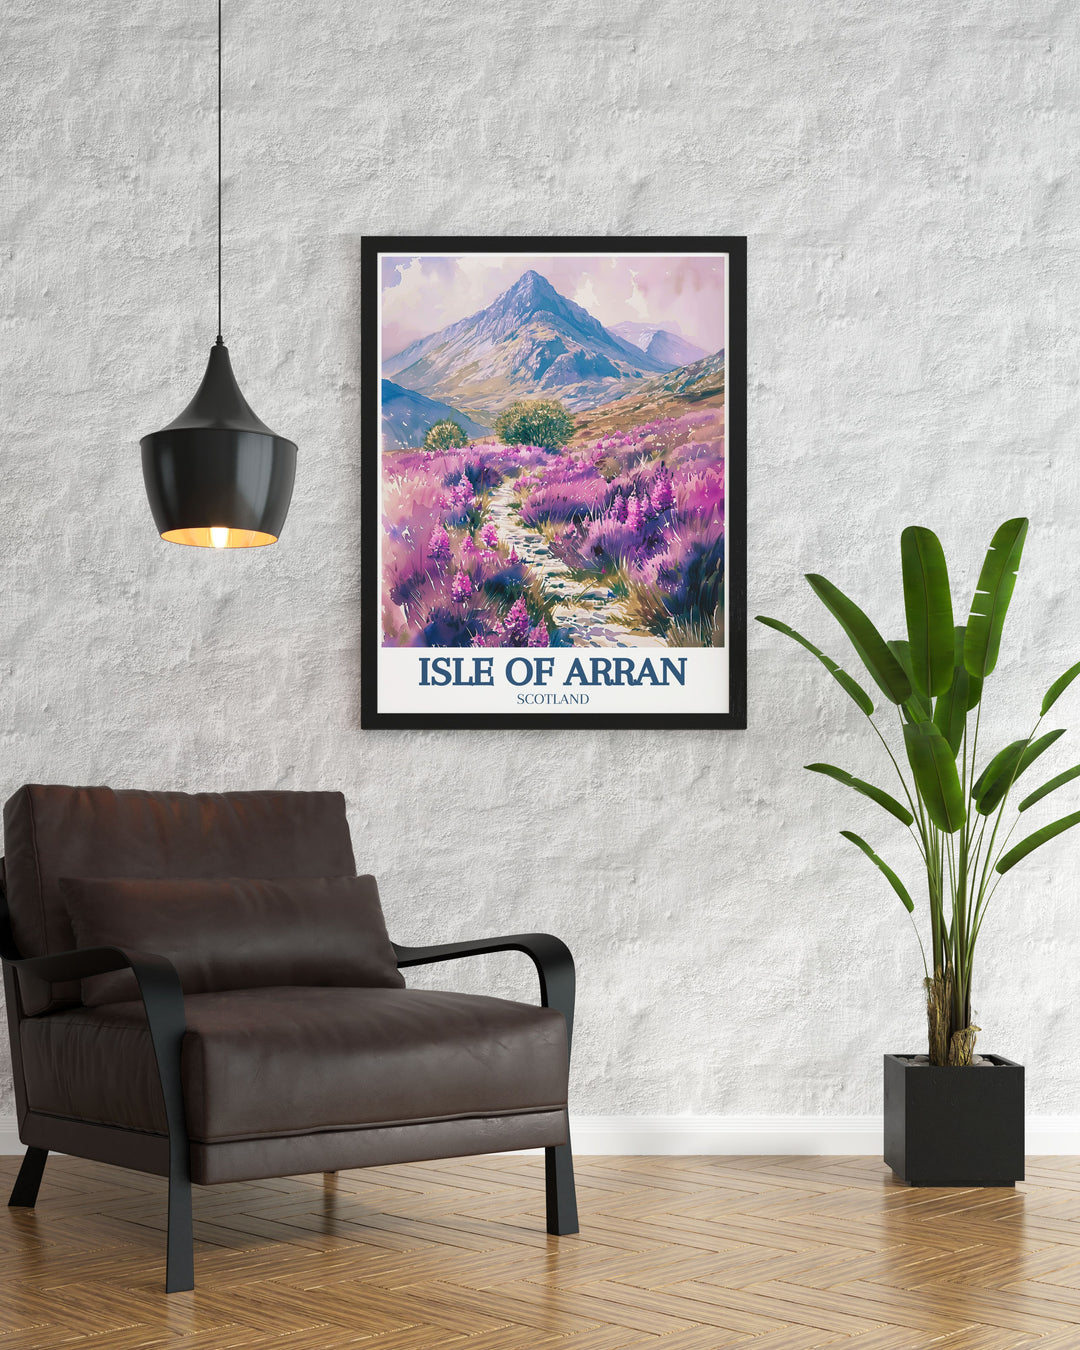 Custom print of Goatfell, capturing the mountains majestic presence and the stunning views from its summit, perfect for adding a touch of Scottish wilderness to your decor.